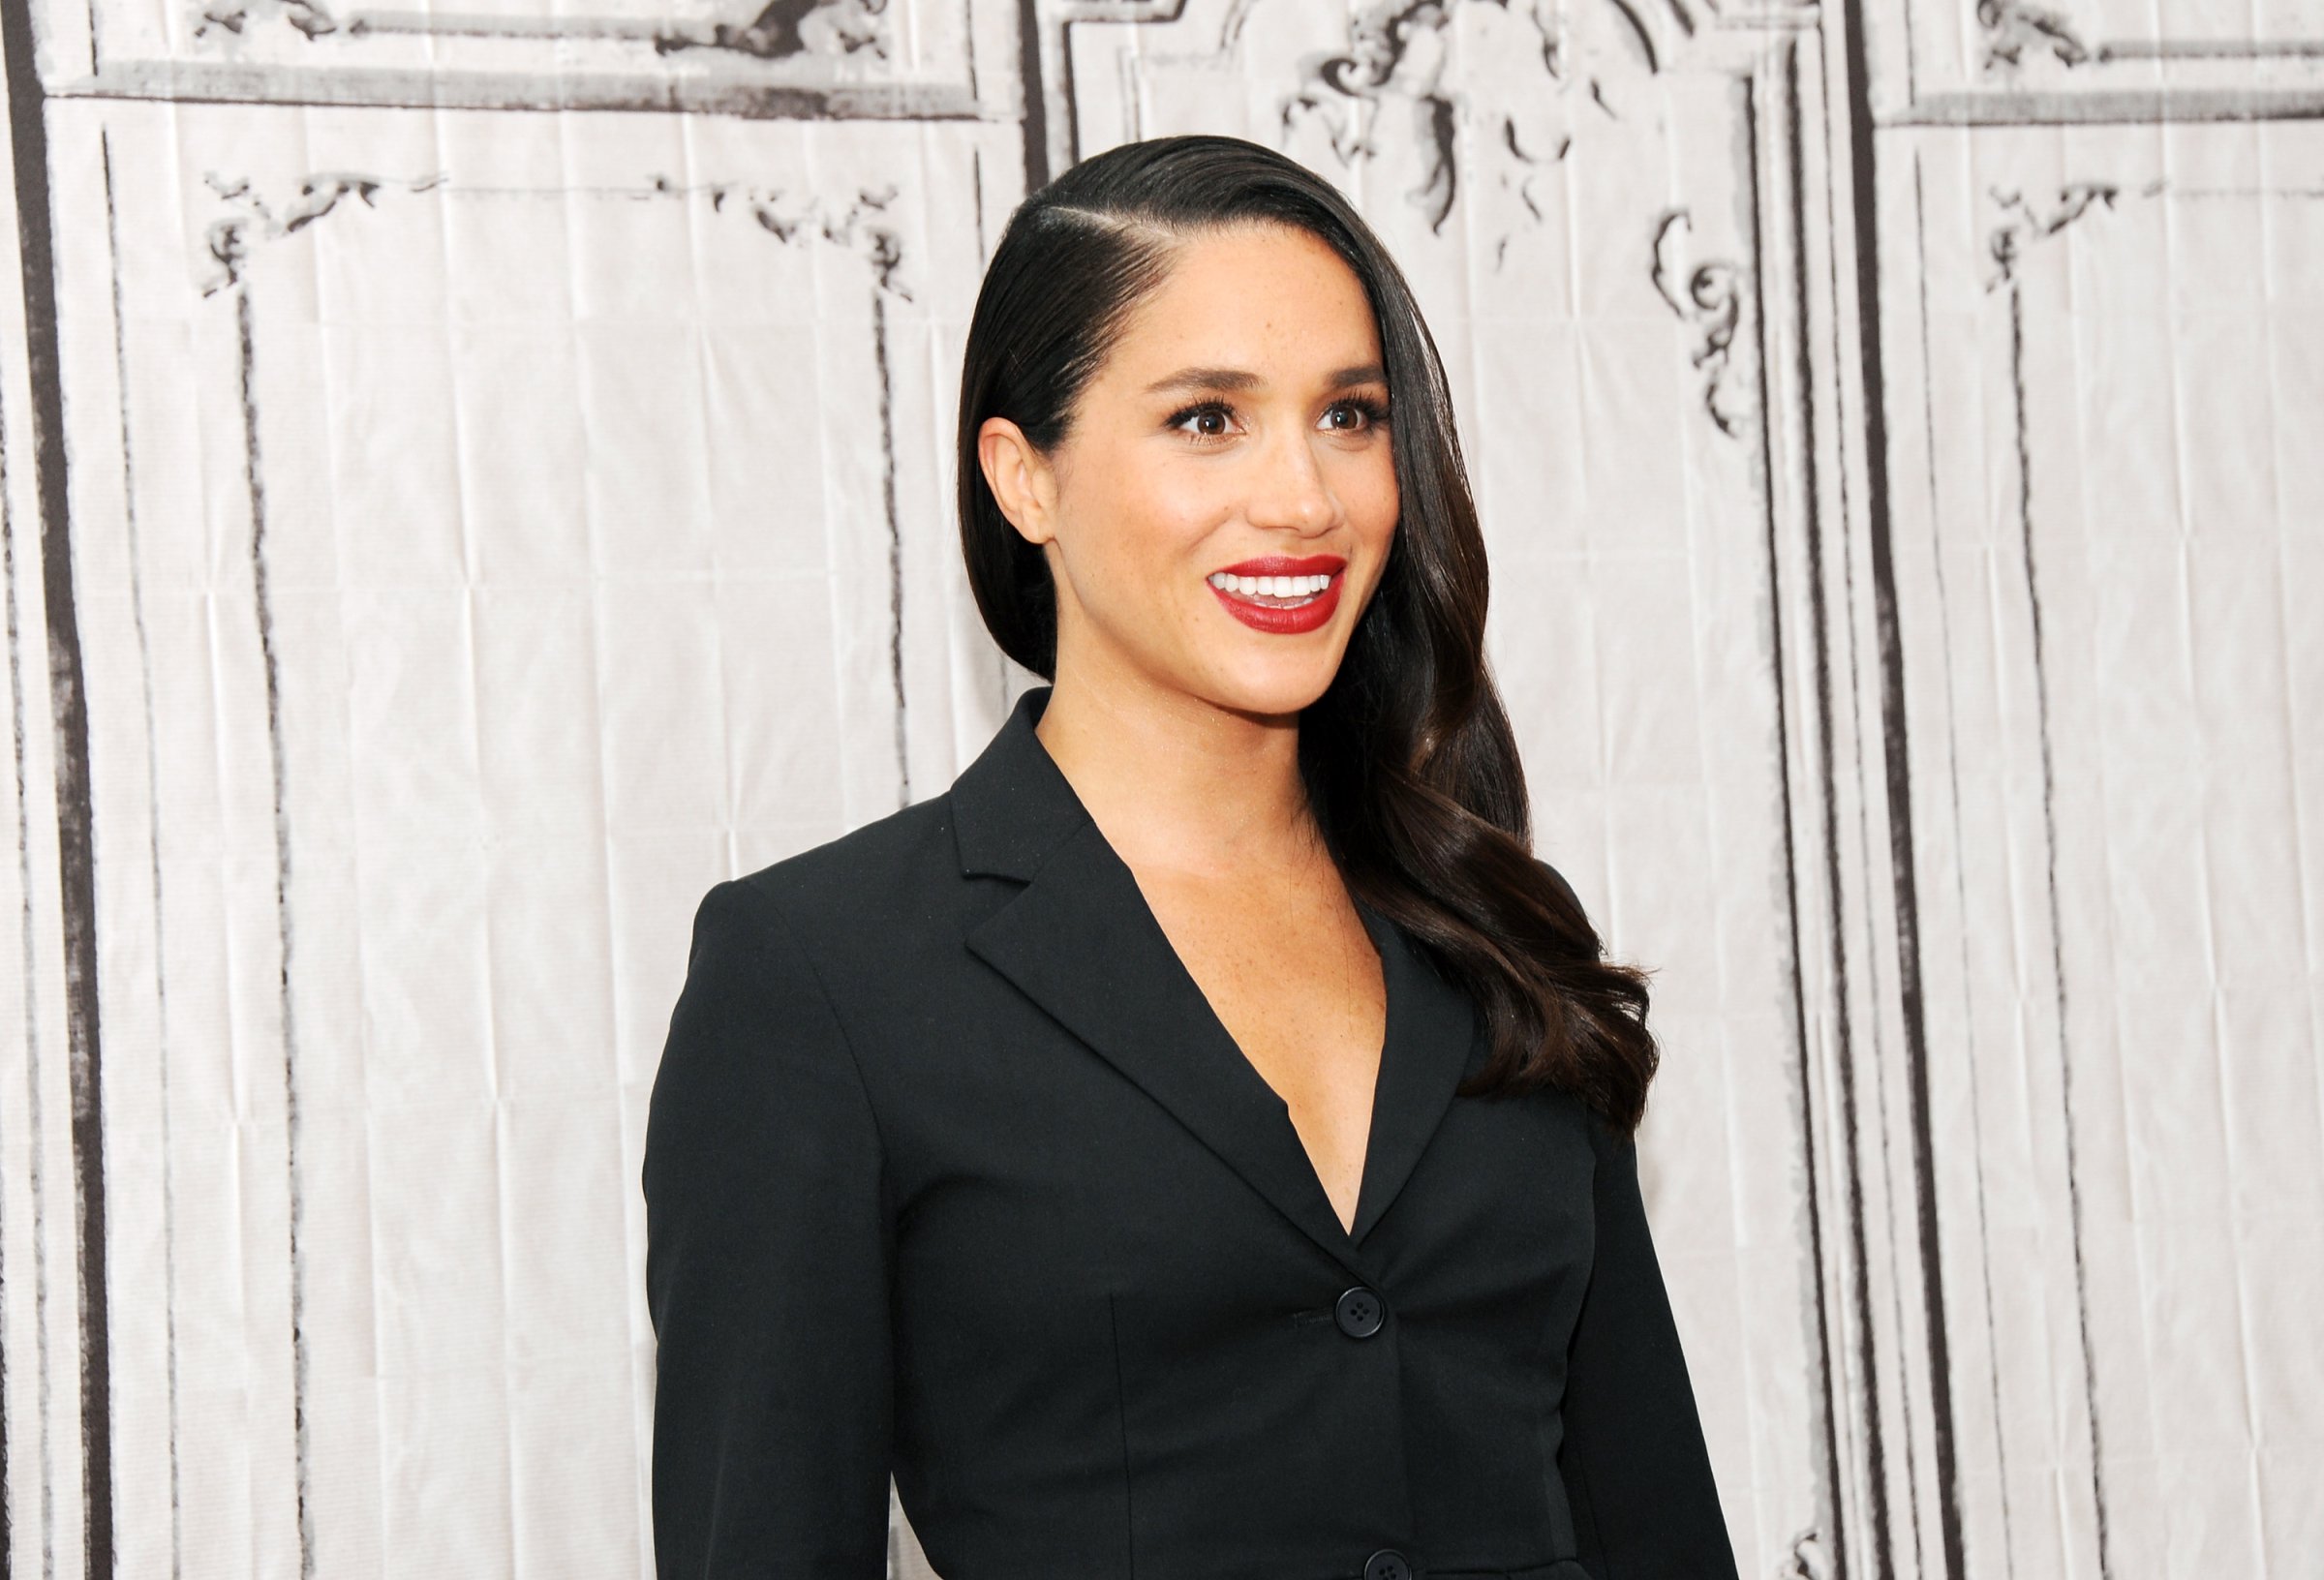 Actress Meghan Markle discusses her role in "Suits" during AOL Build at AOL Studios In New York on March 17, 2016 in New York City.